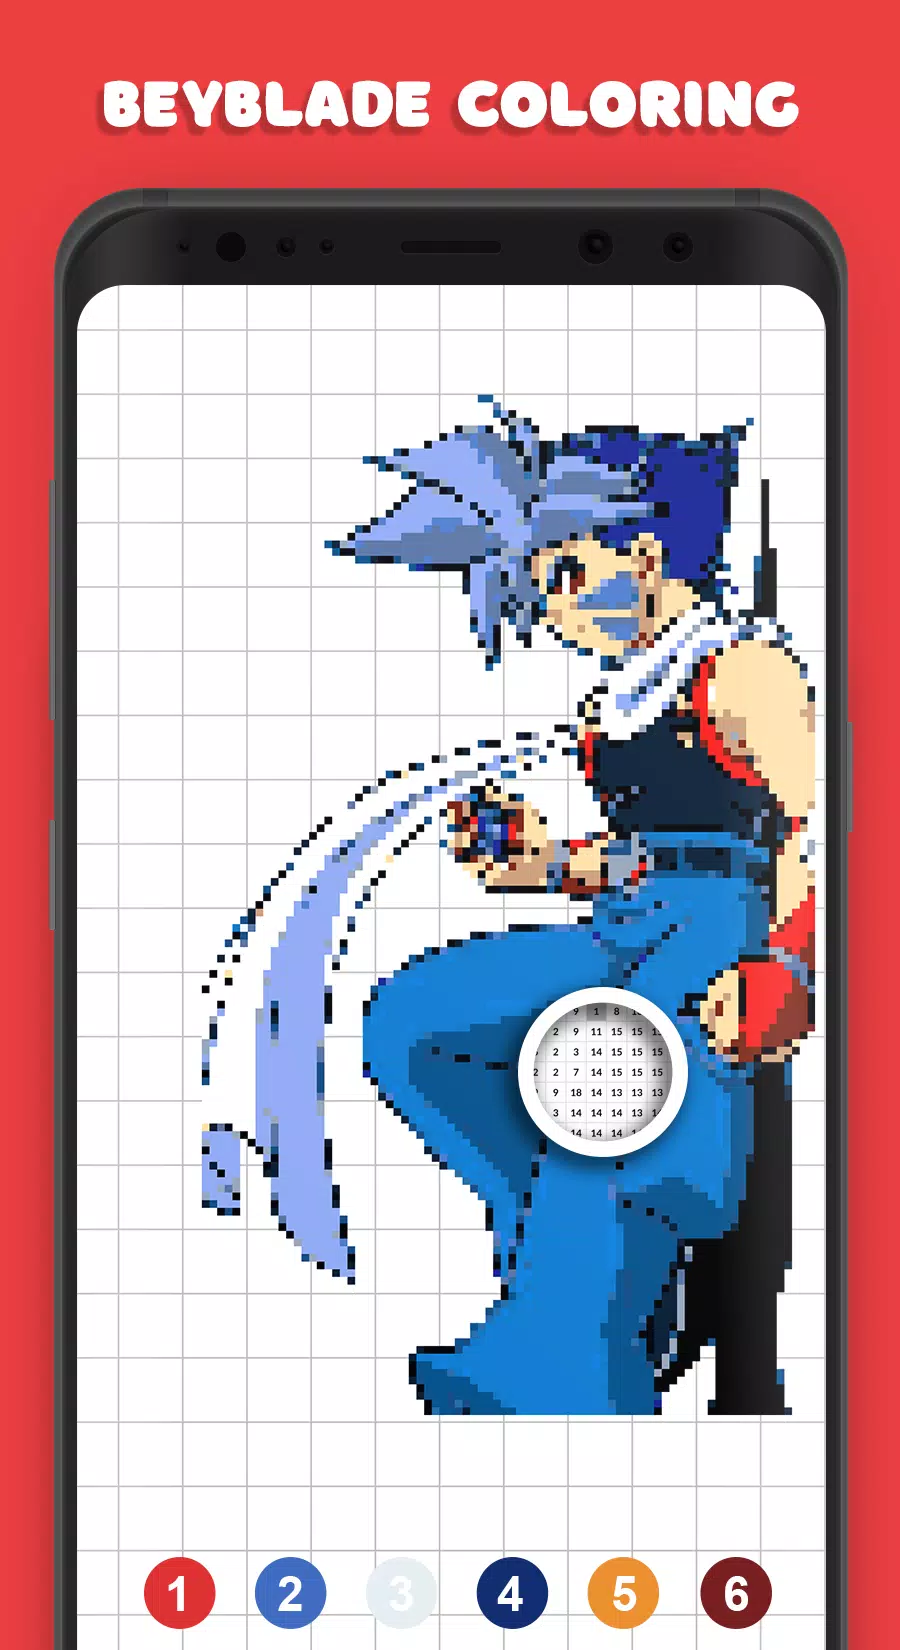 Beyblade Pixel Art - Coloring Books Free for Android - APK Download